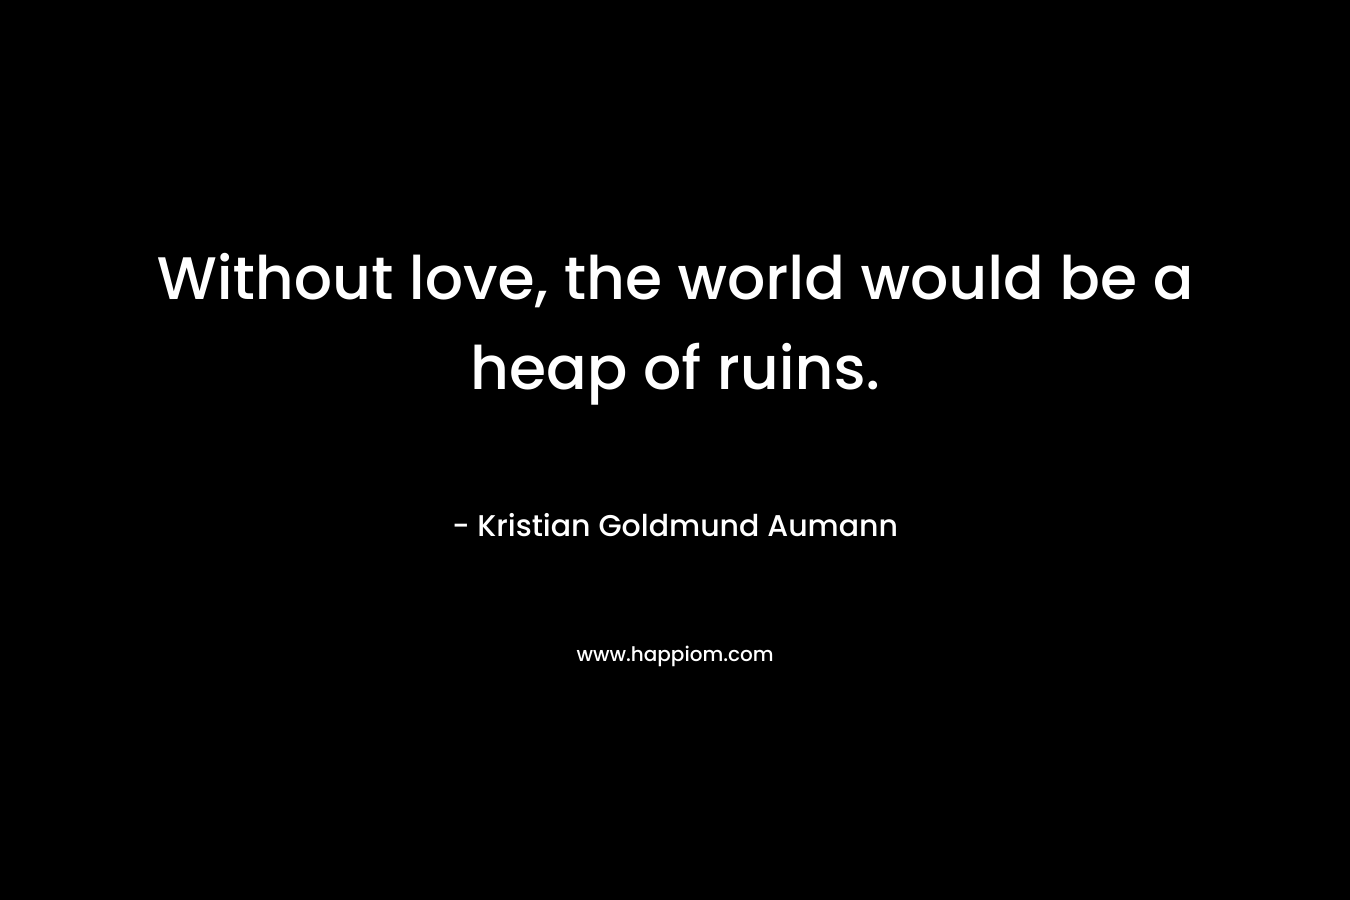 Without love, the world would be a heap of ruins. – Kristian Goldmund Aumann